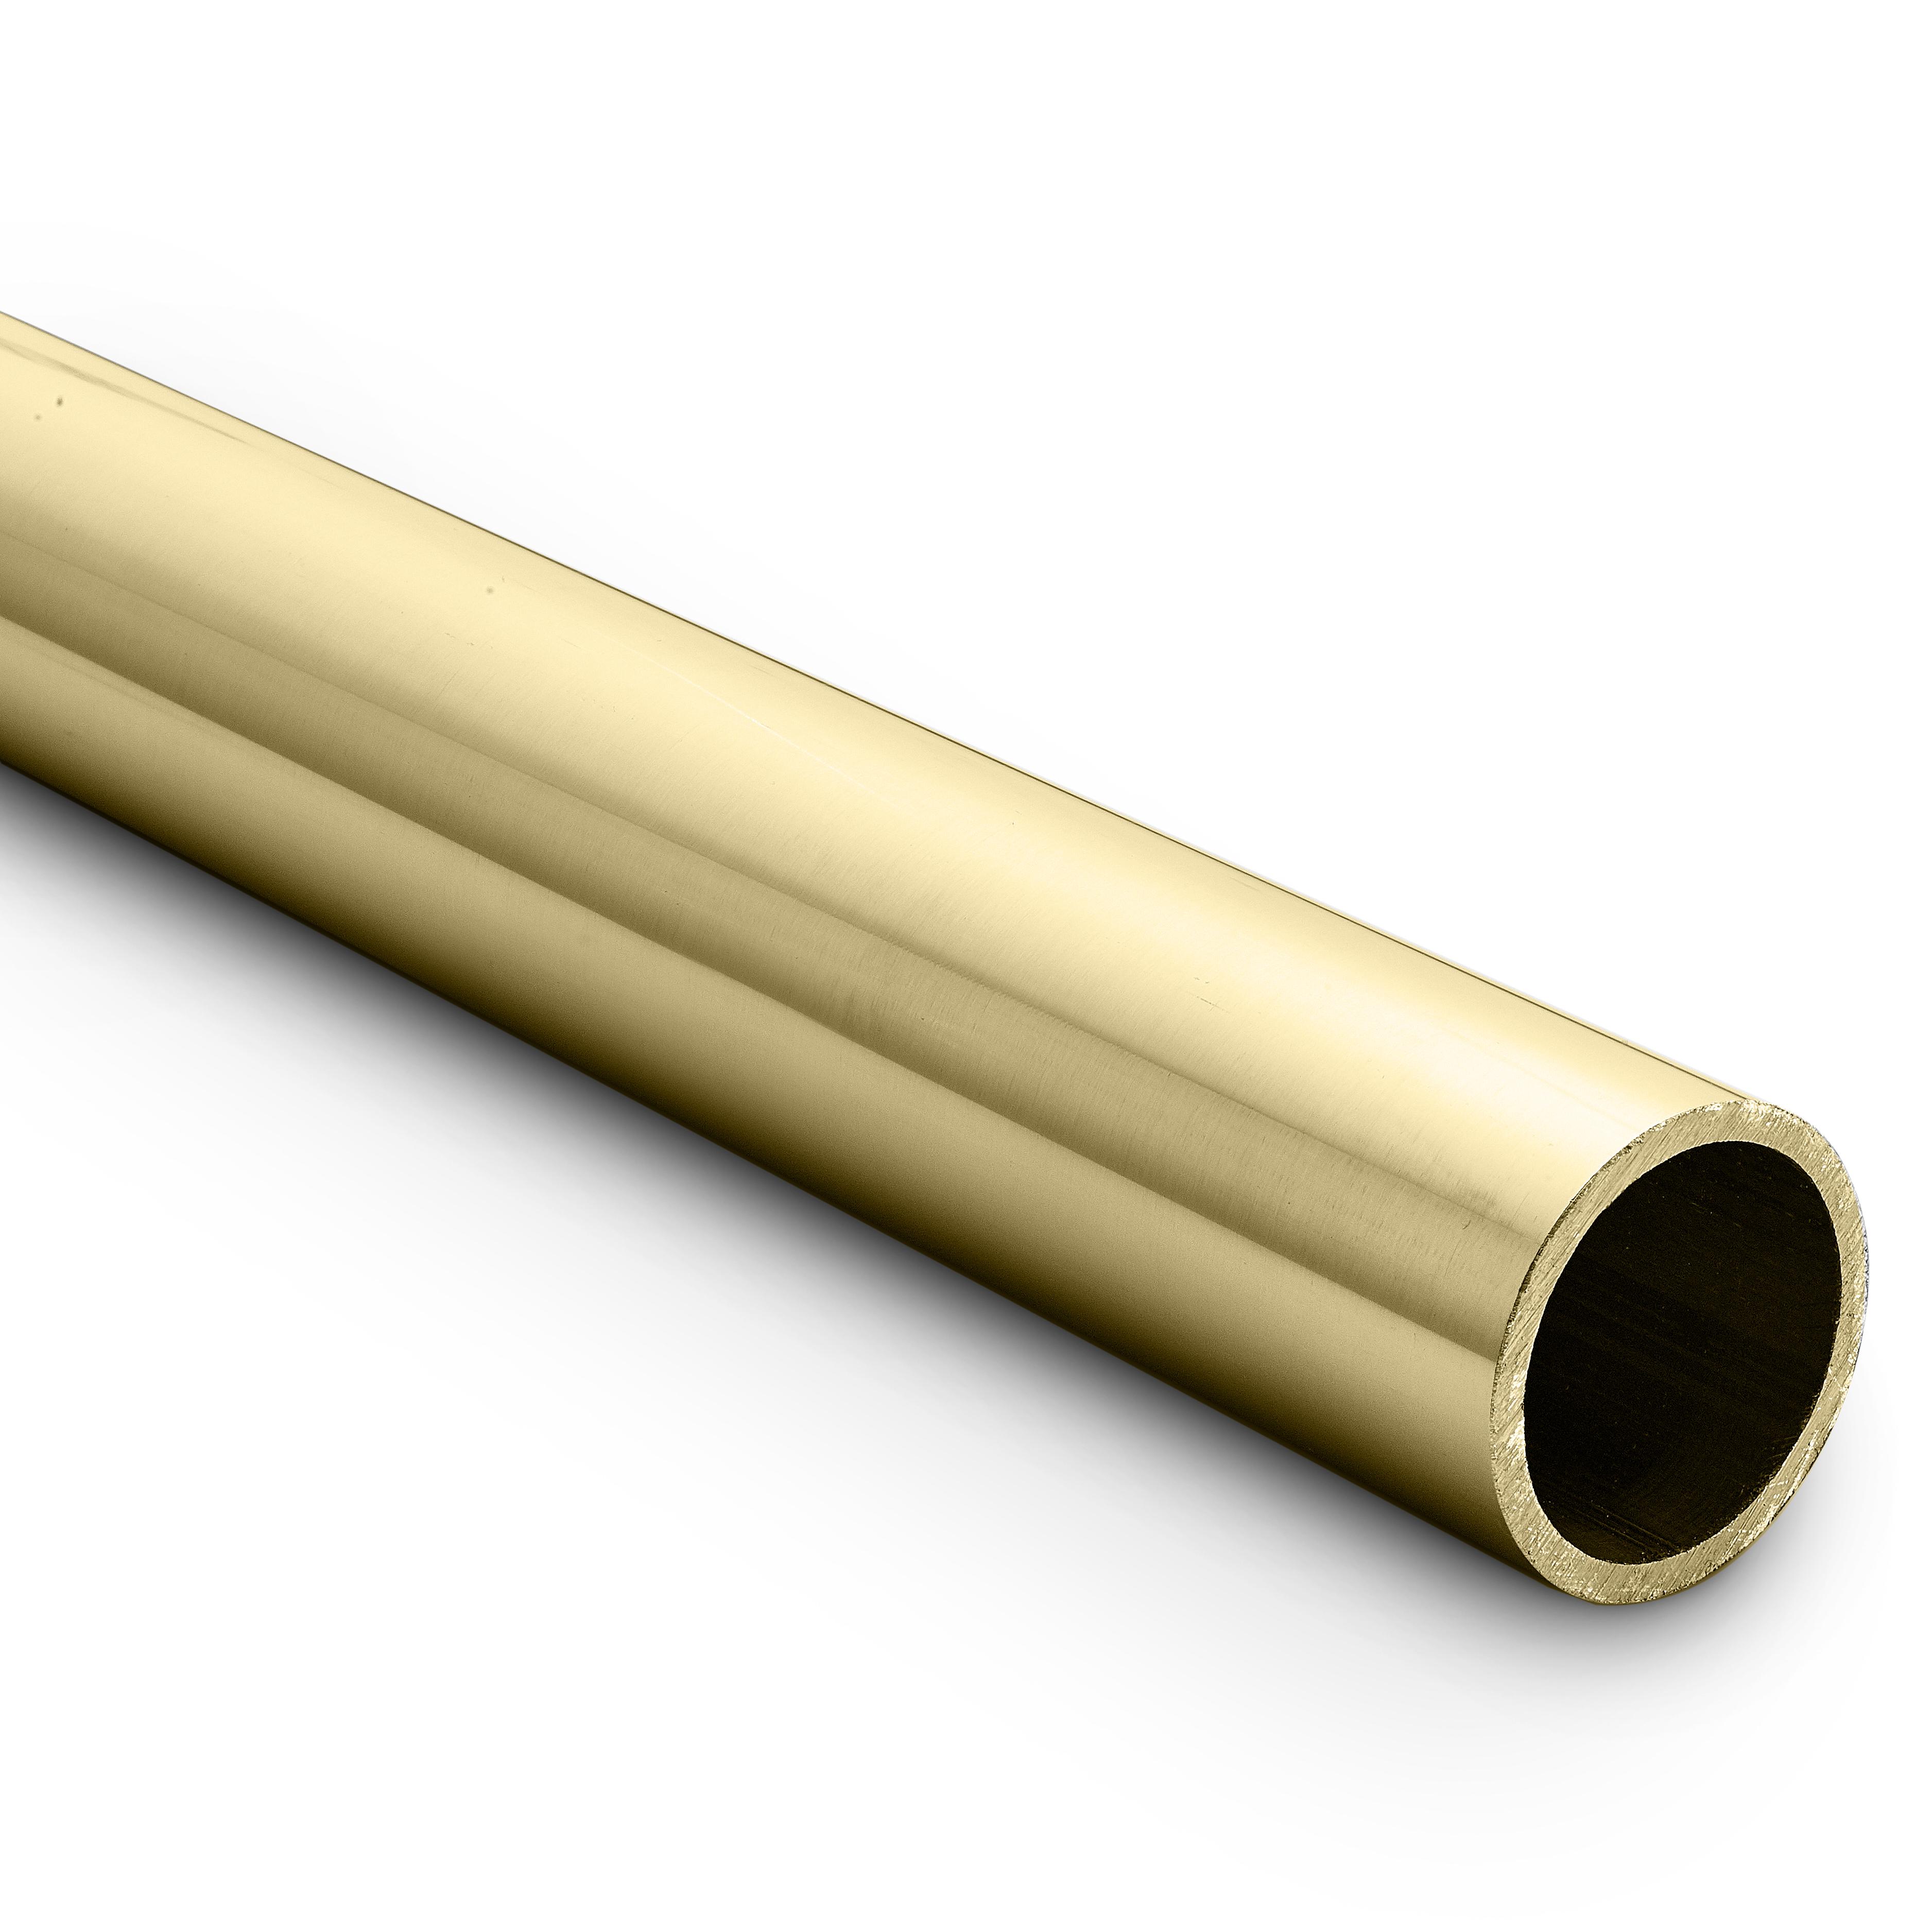 Solid Polished Brass Tube 25mm Diameter - Polished Brass House of